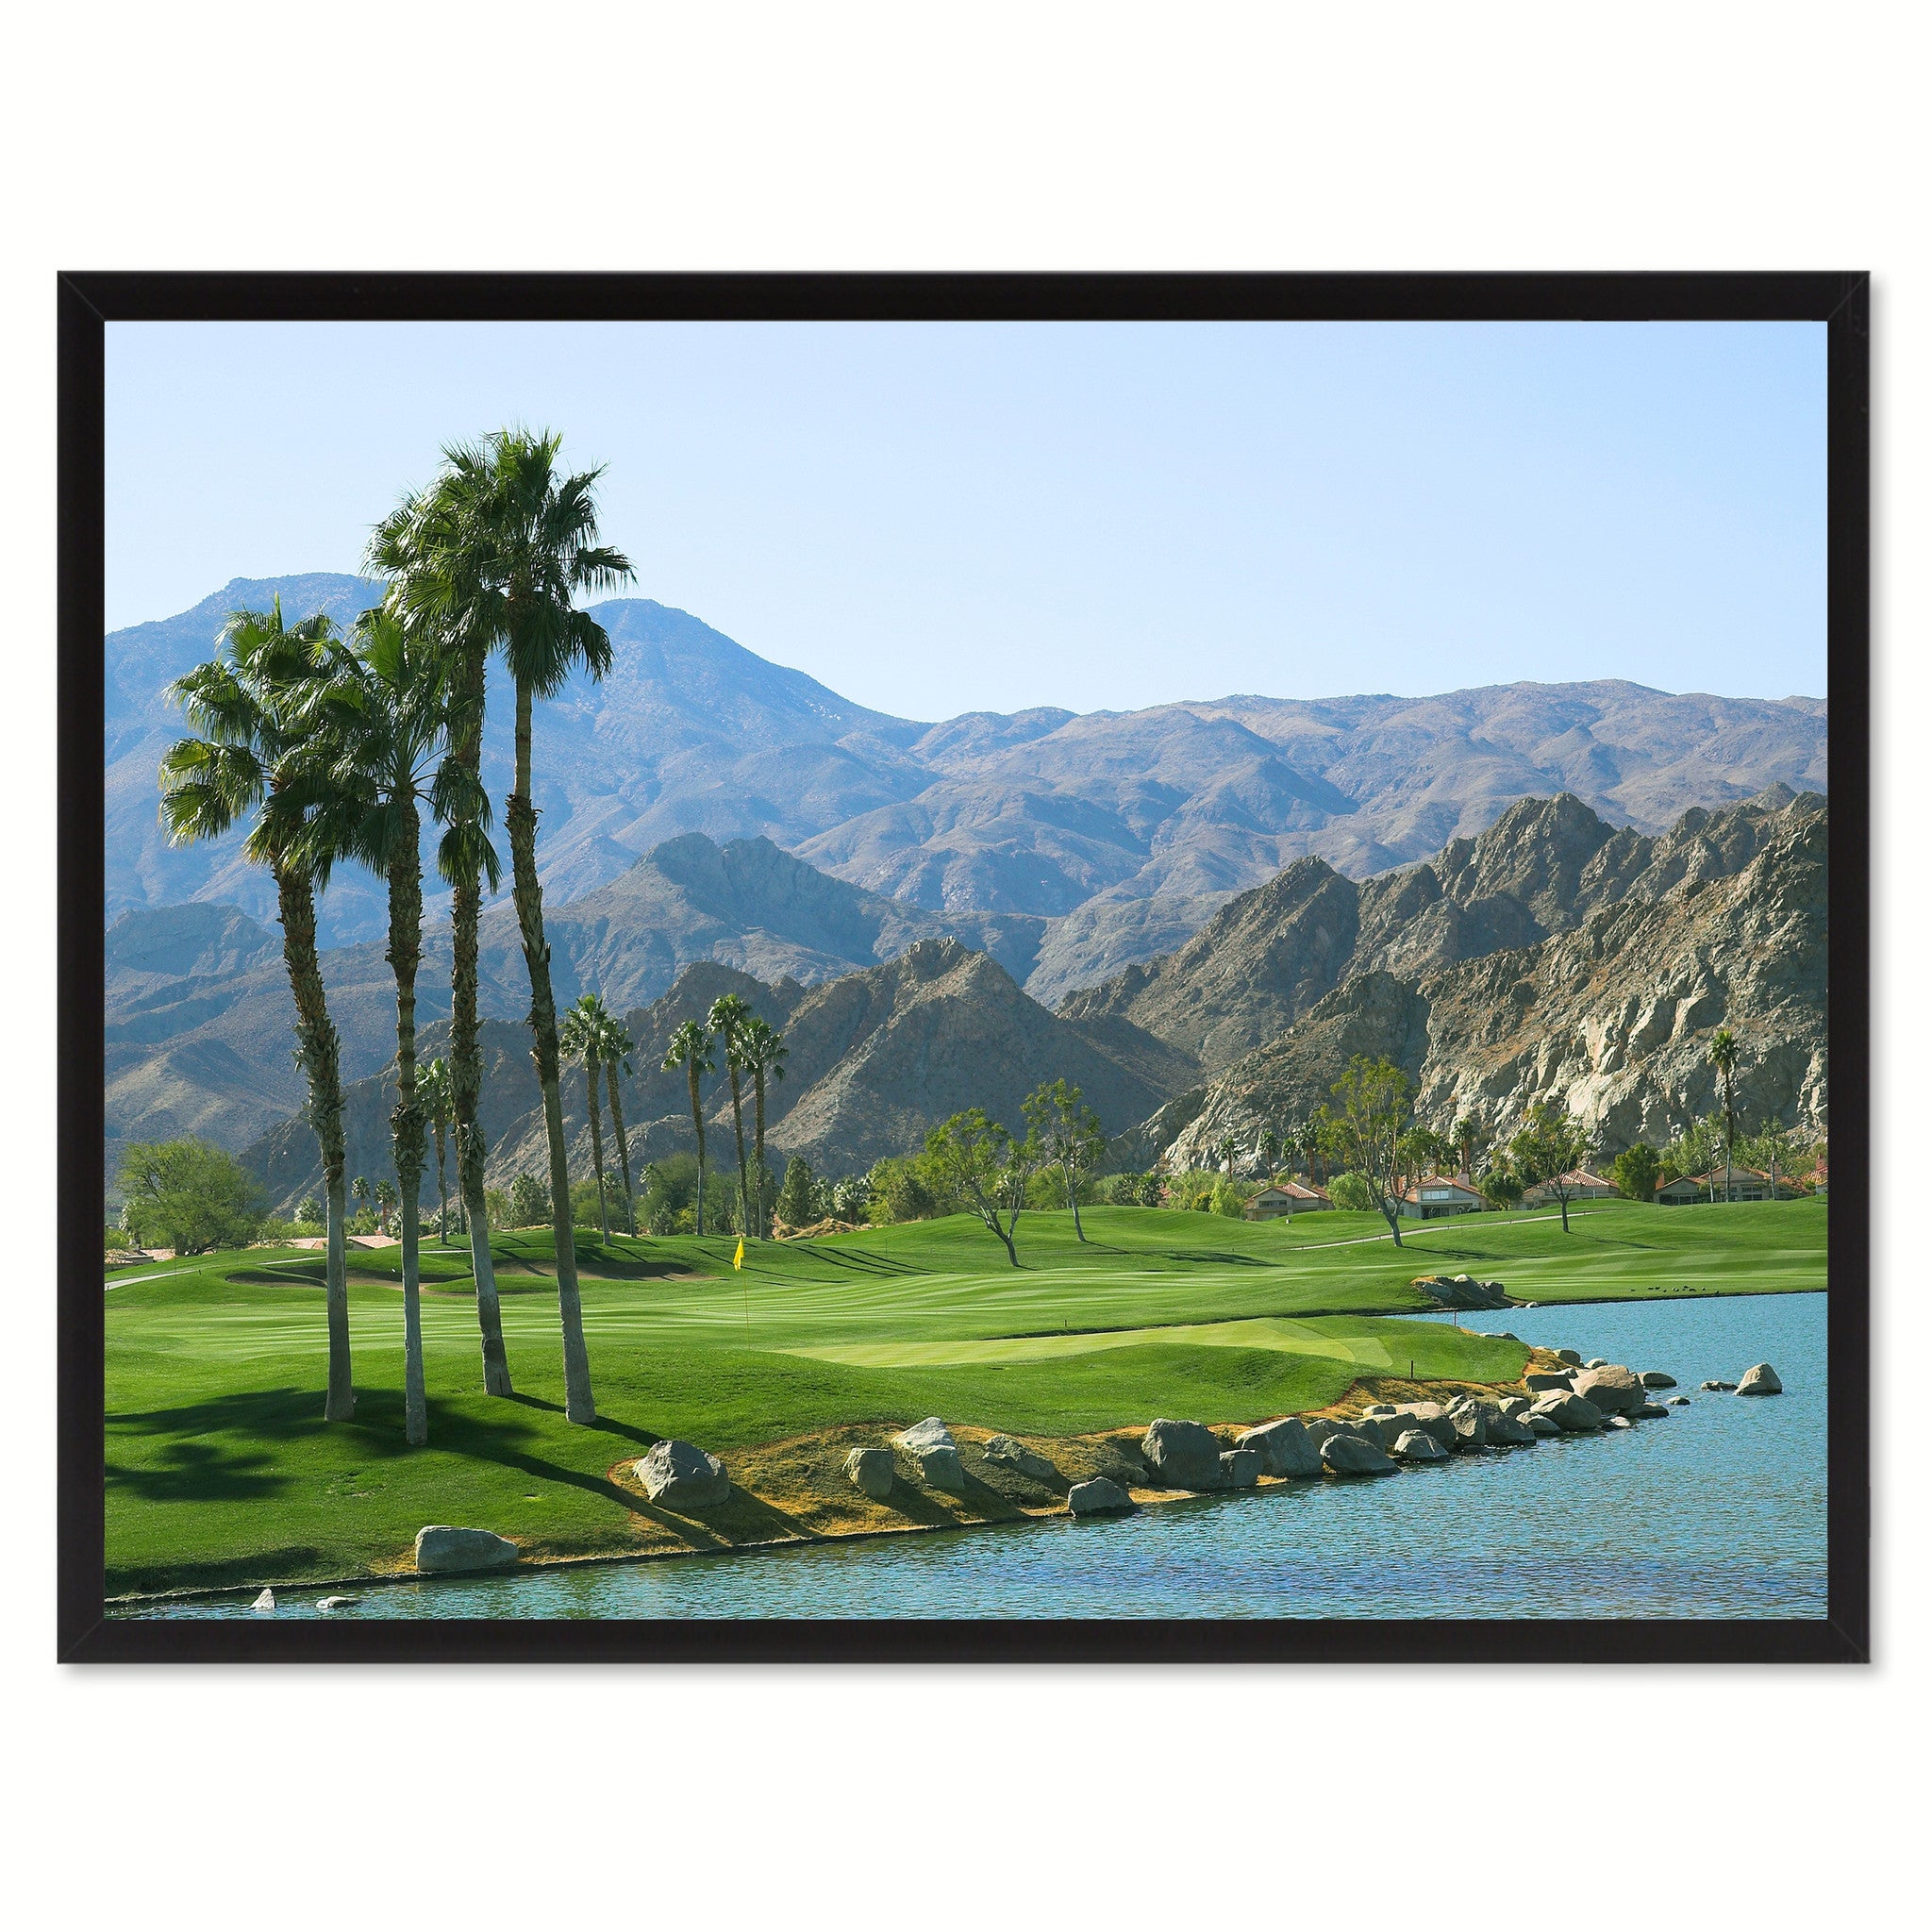 West Palm Springs Golf Course Photo Canvas Print Pictures Frames Home Décor Wall Art Gifts